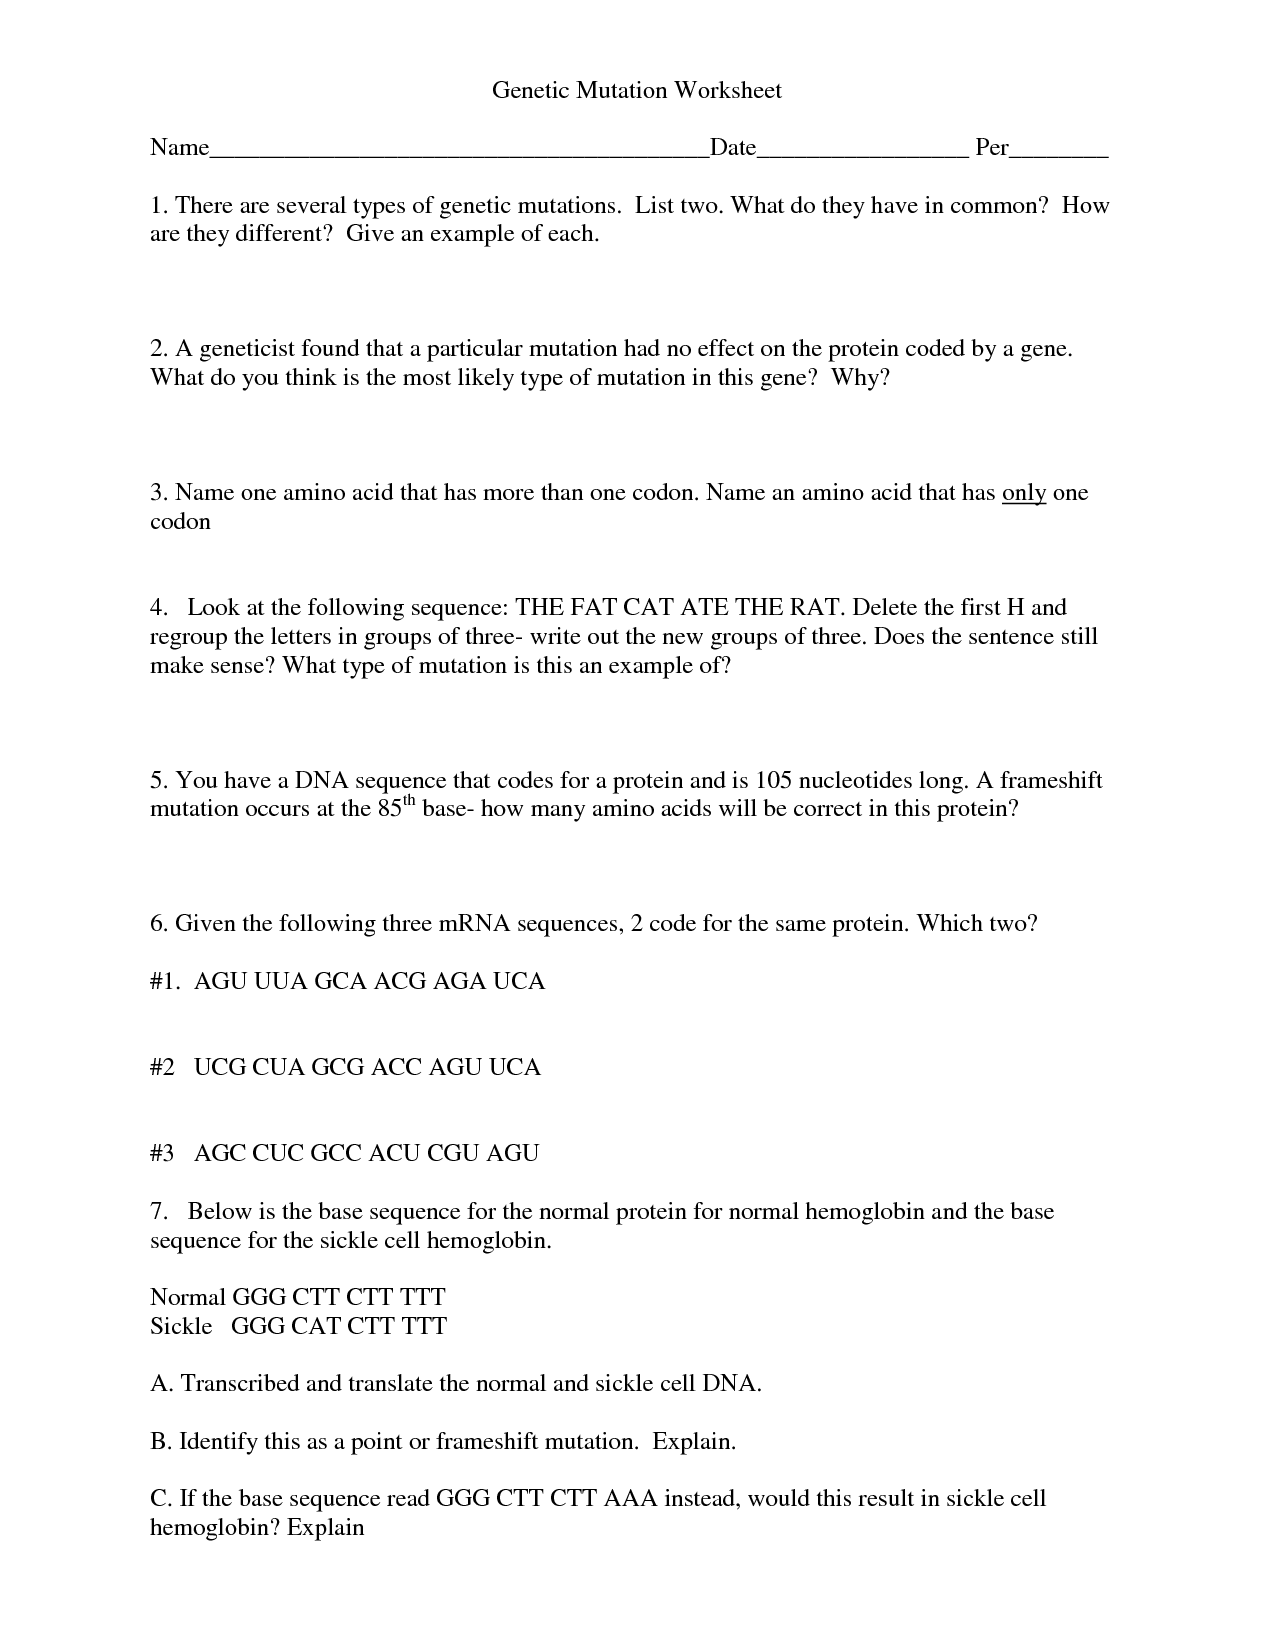 13 Best Images of Chromosomes And Genes Worksheet  DNA and Replication Worksheet Answers, Gene 